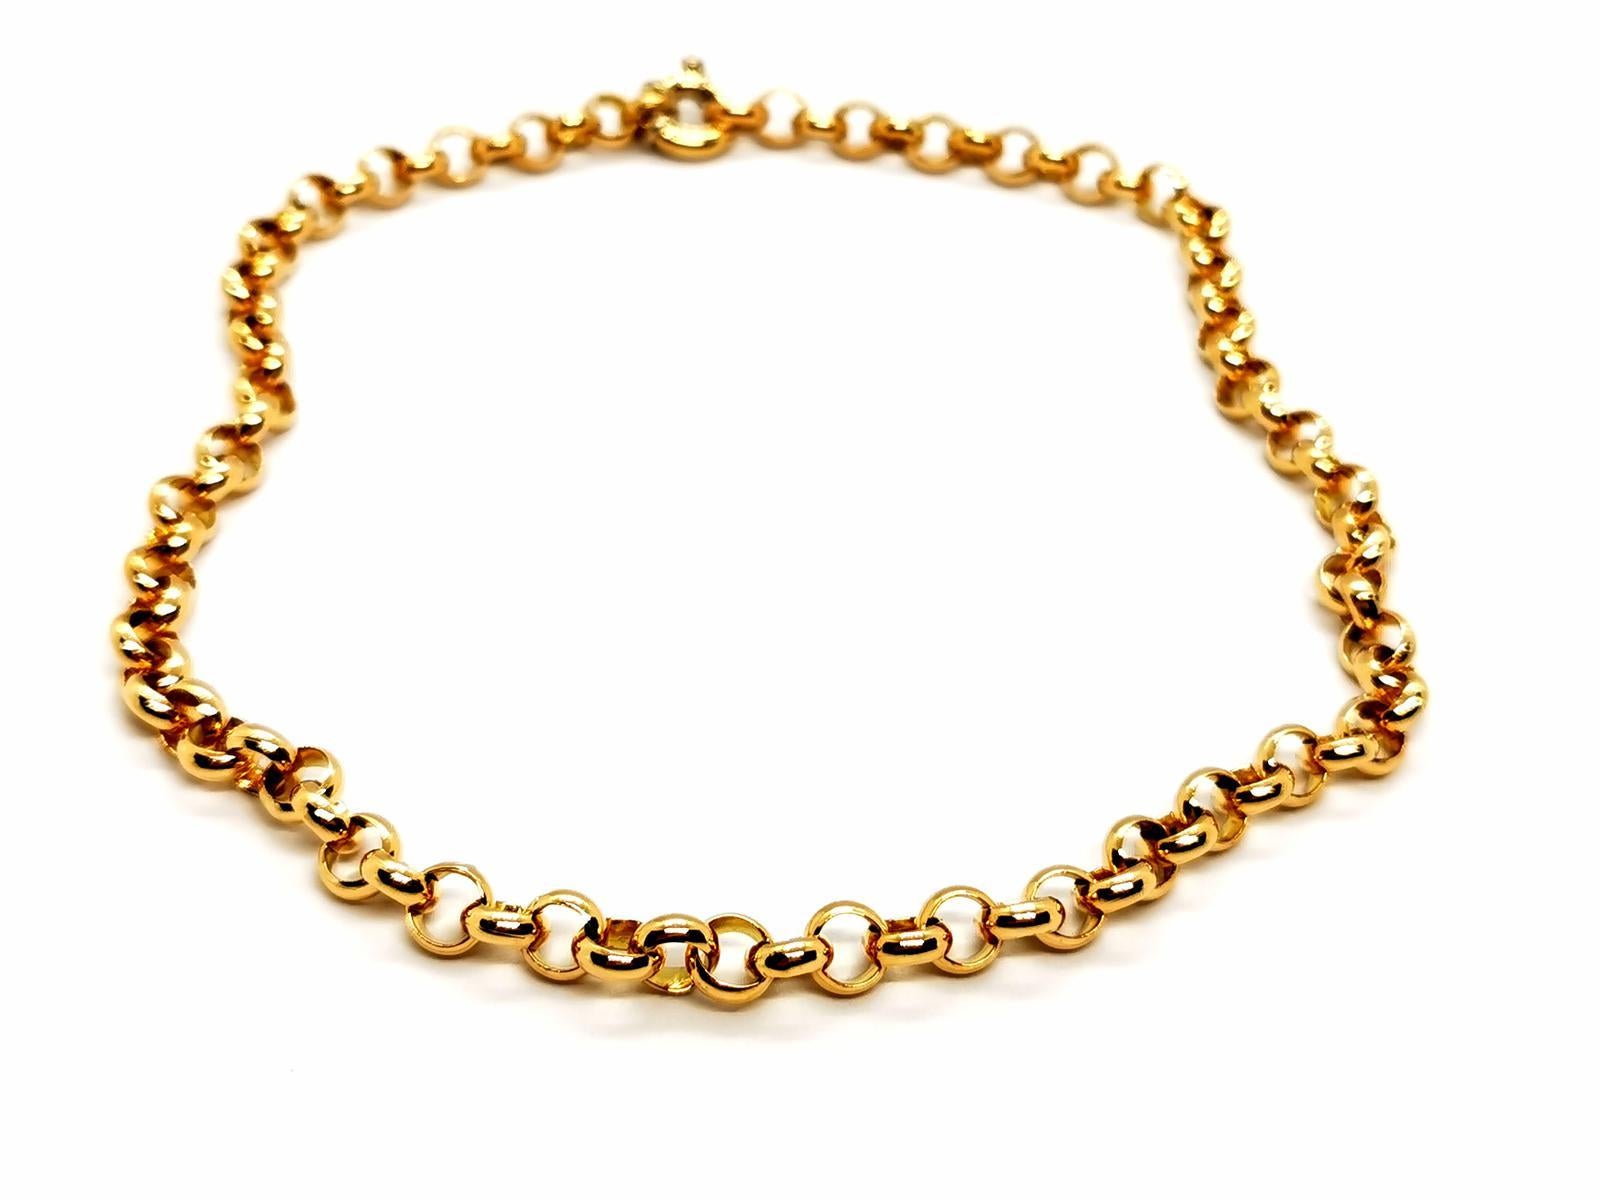 Necklace in 750 thousandths yellow gold (18 carats). jaseron link. solid. length: 44.5 cm. width of a link: 0.76 cm. thickness: 0.45 cm. fermpir buoy. total weight: 64.86 g. eagle's head hallmark. excellent condition
